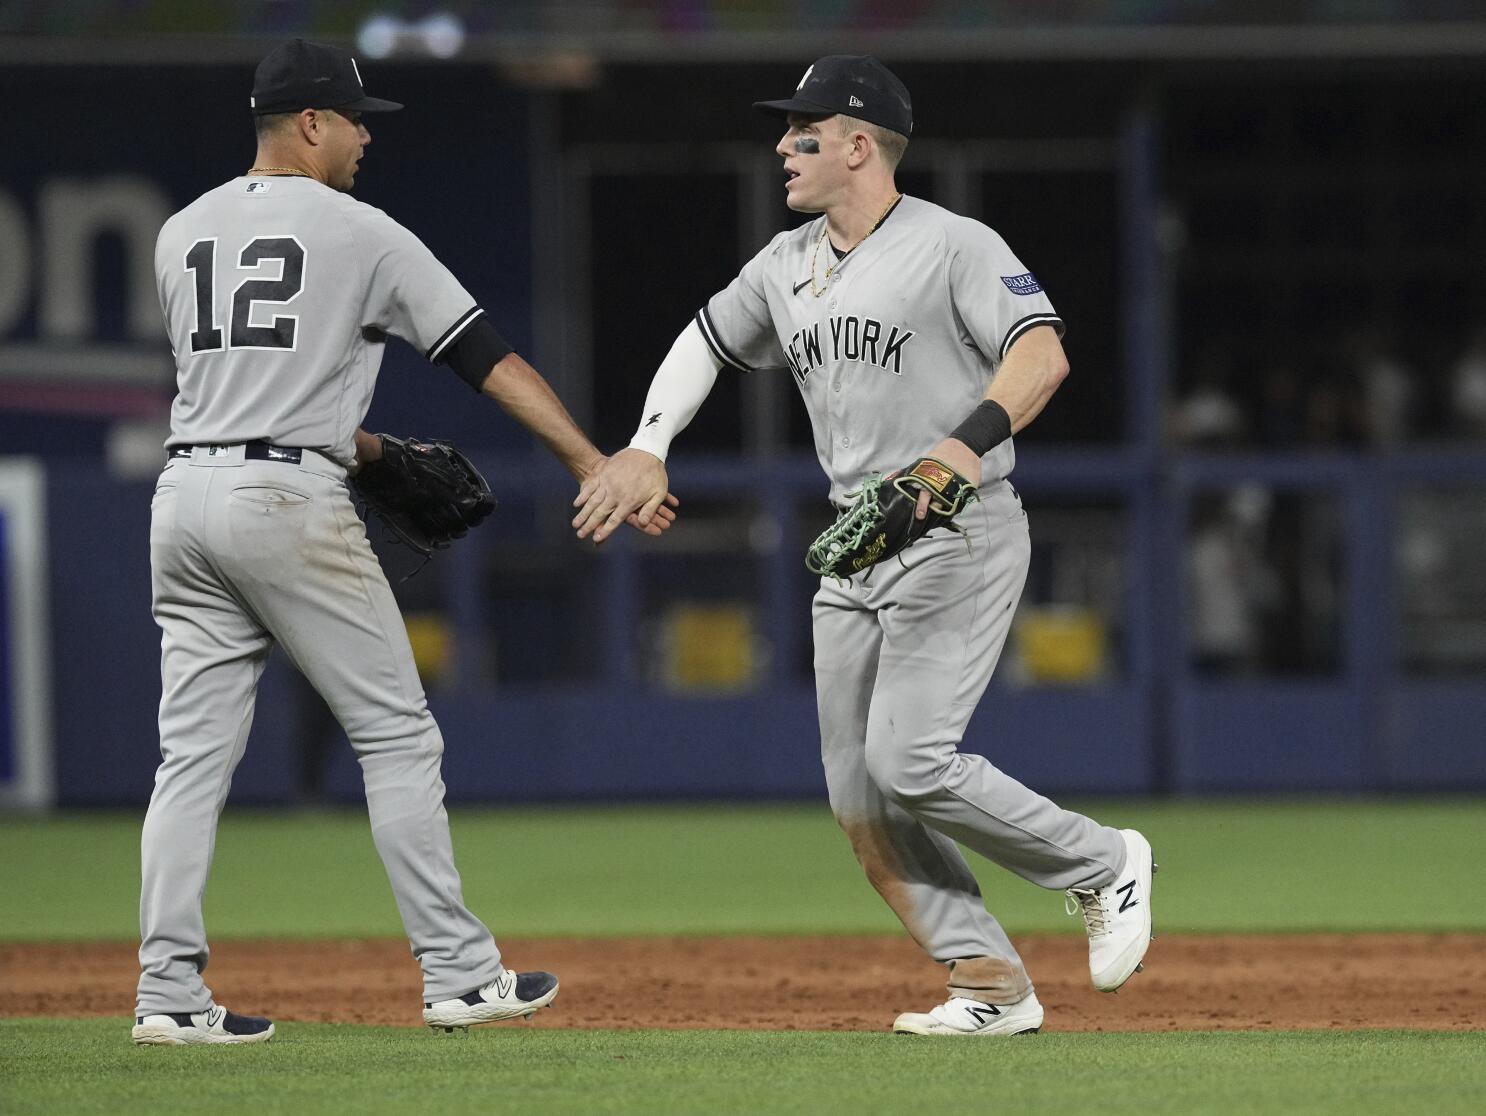 Anthony Rizzo HR leads New York Yankees over Miami Marlins